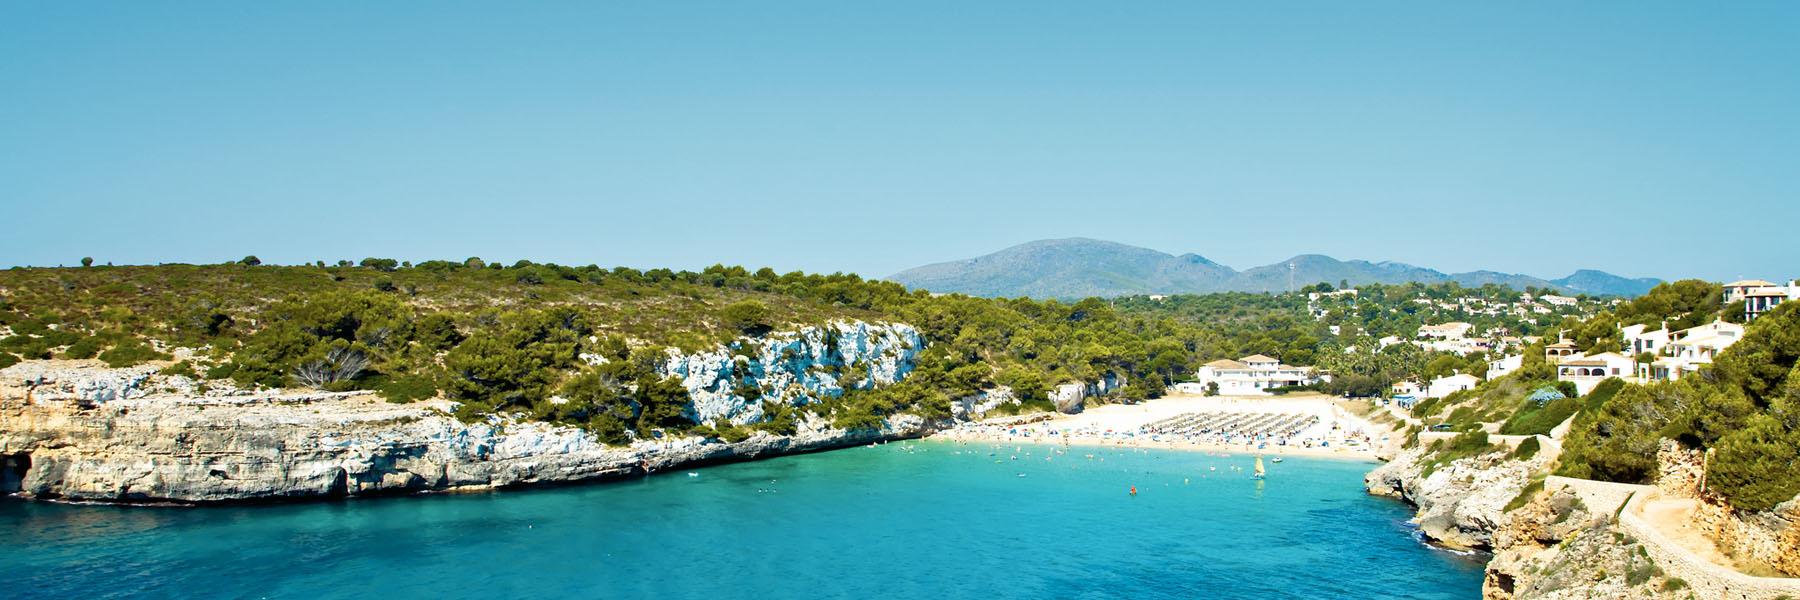 Image of a Majorcan coast and resort in May